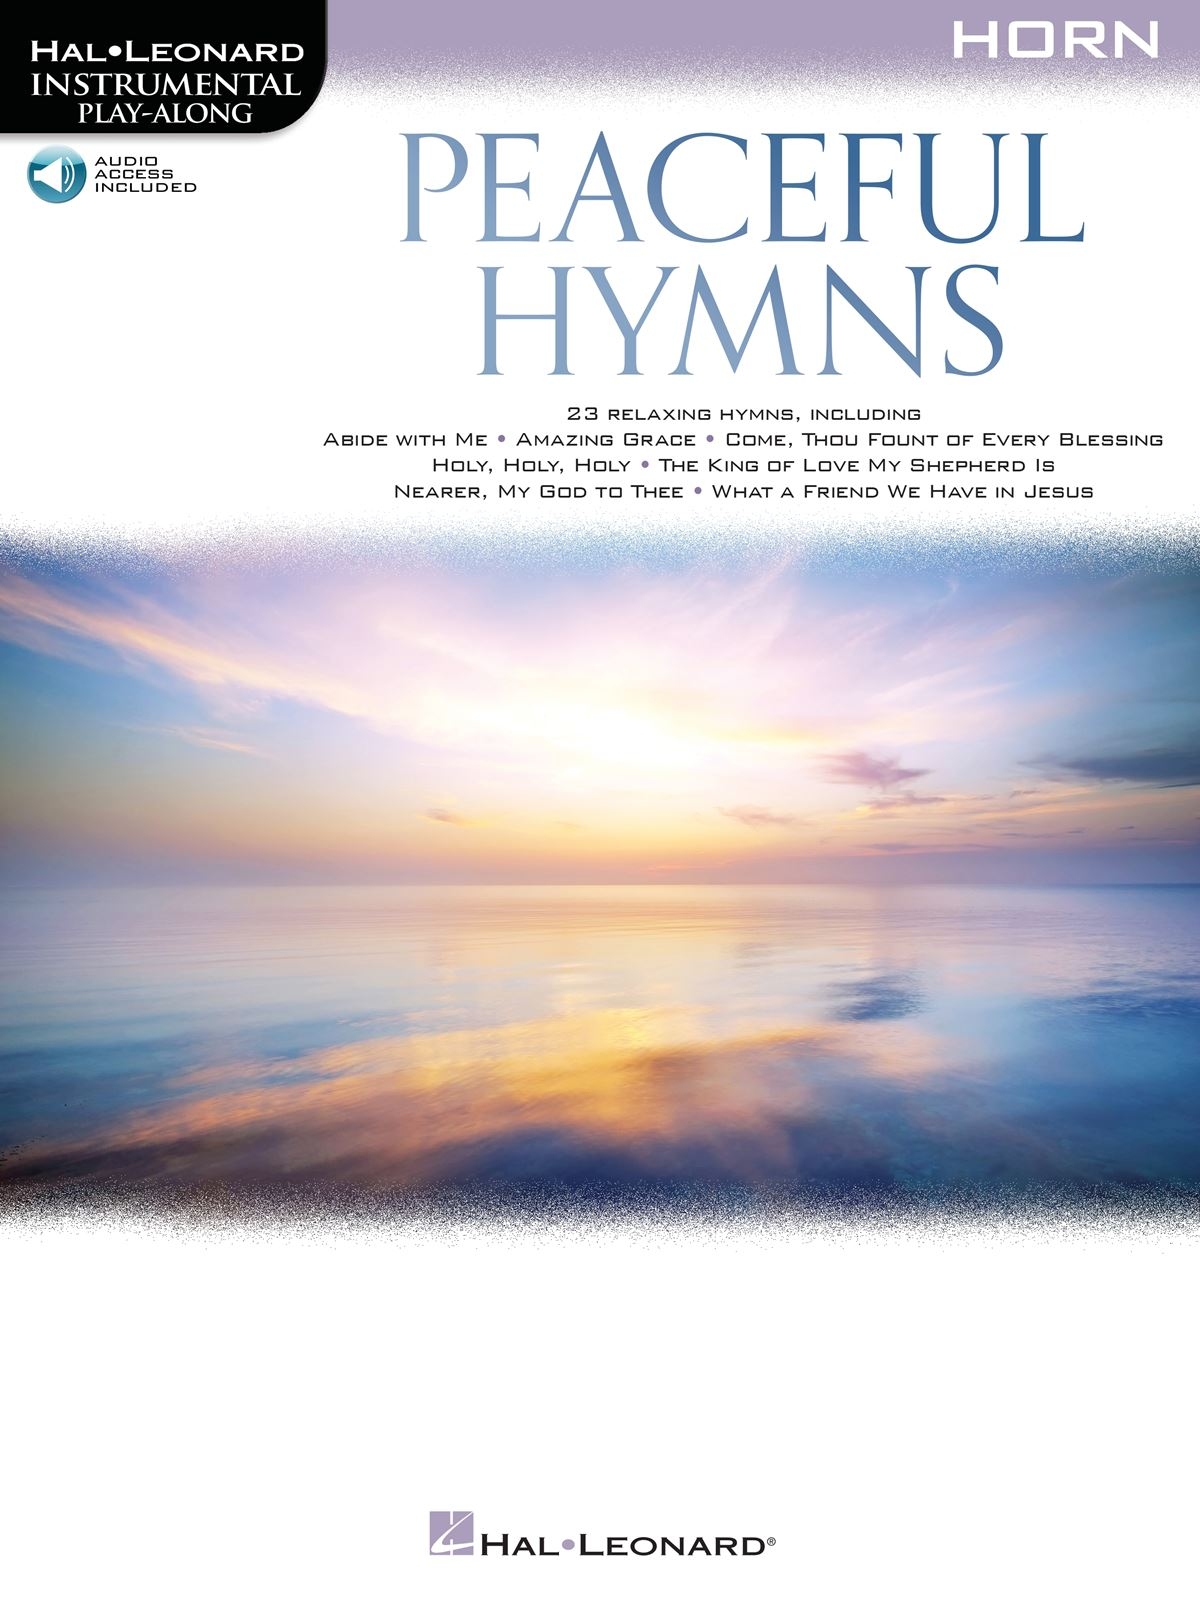 Peaceful Hymns for Horn